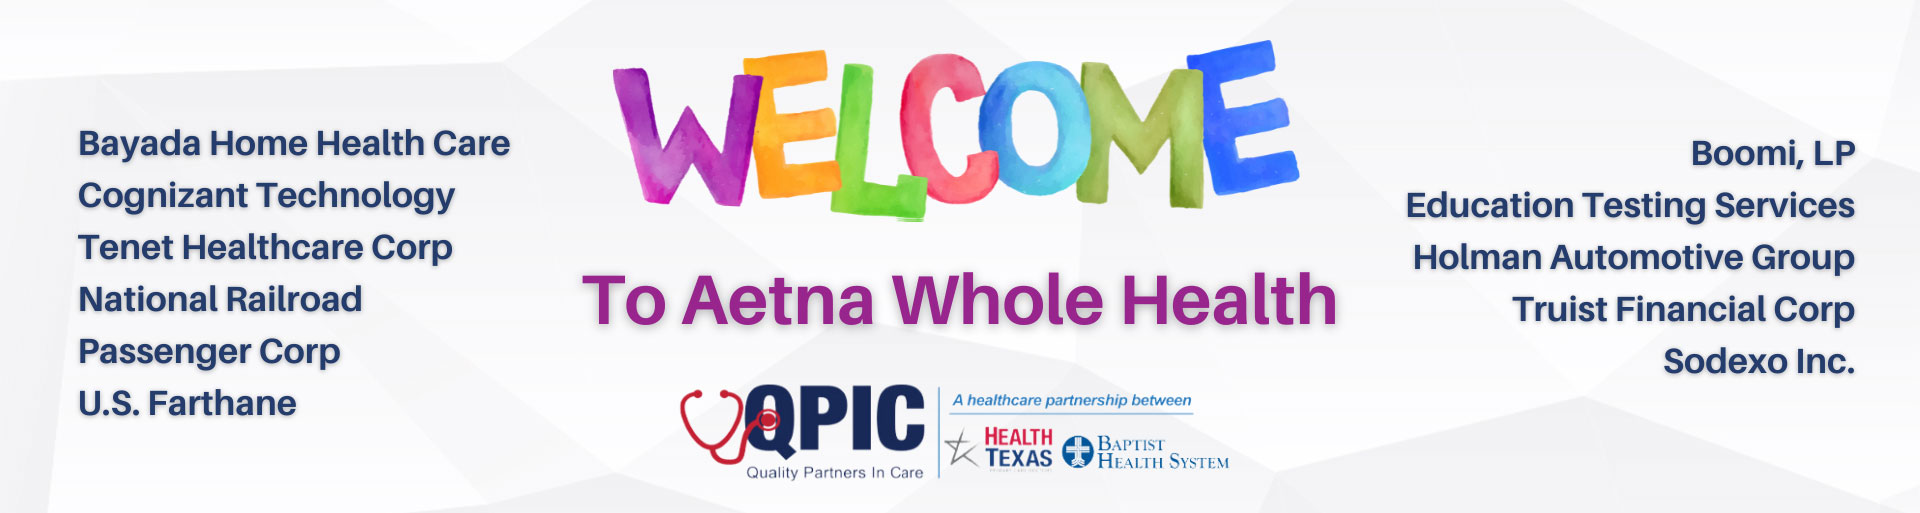 aetna welcome banner